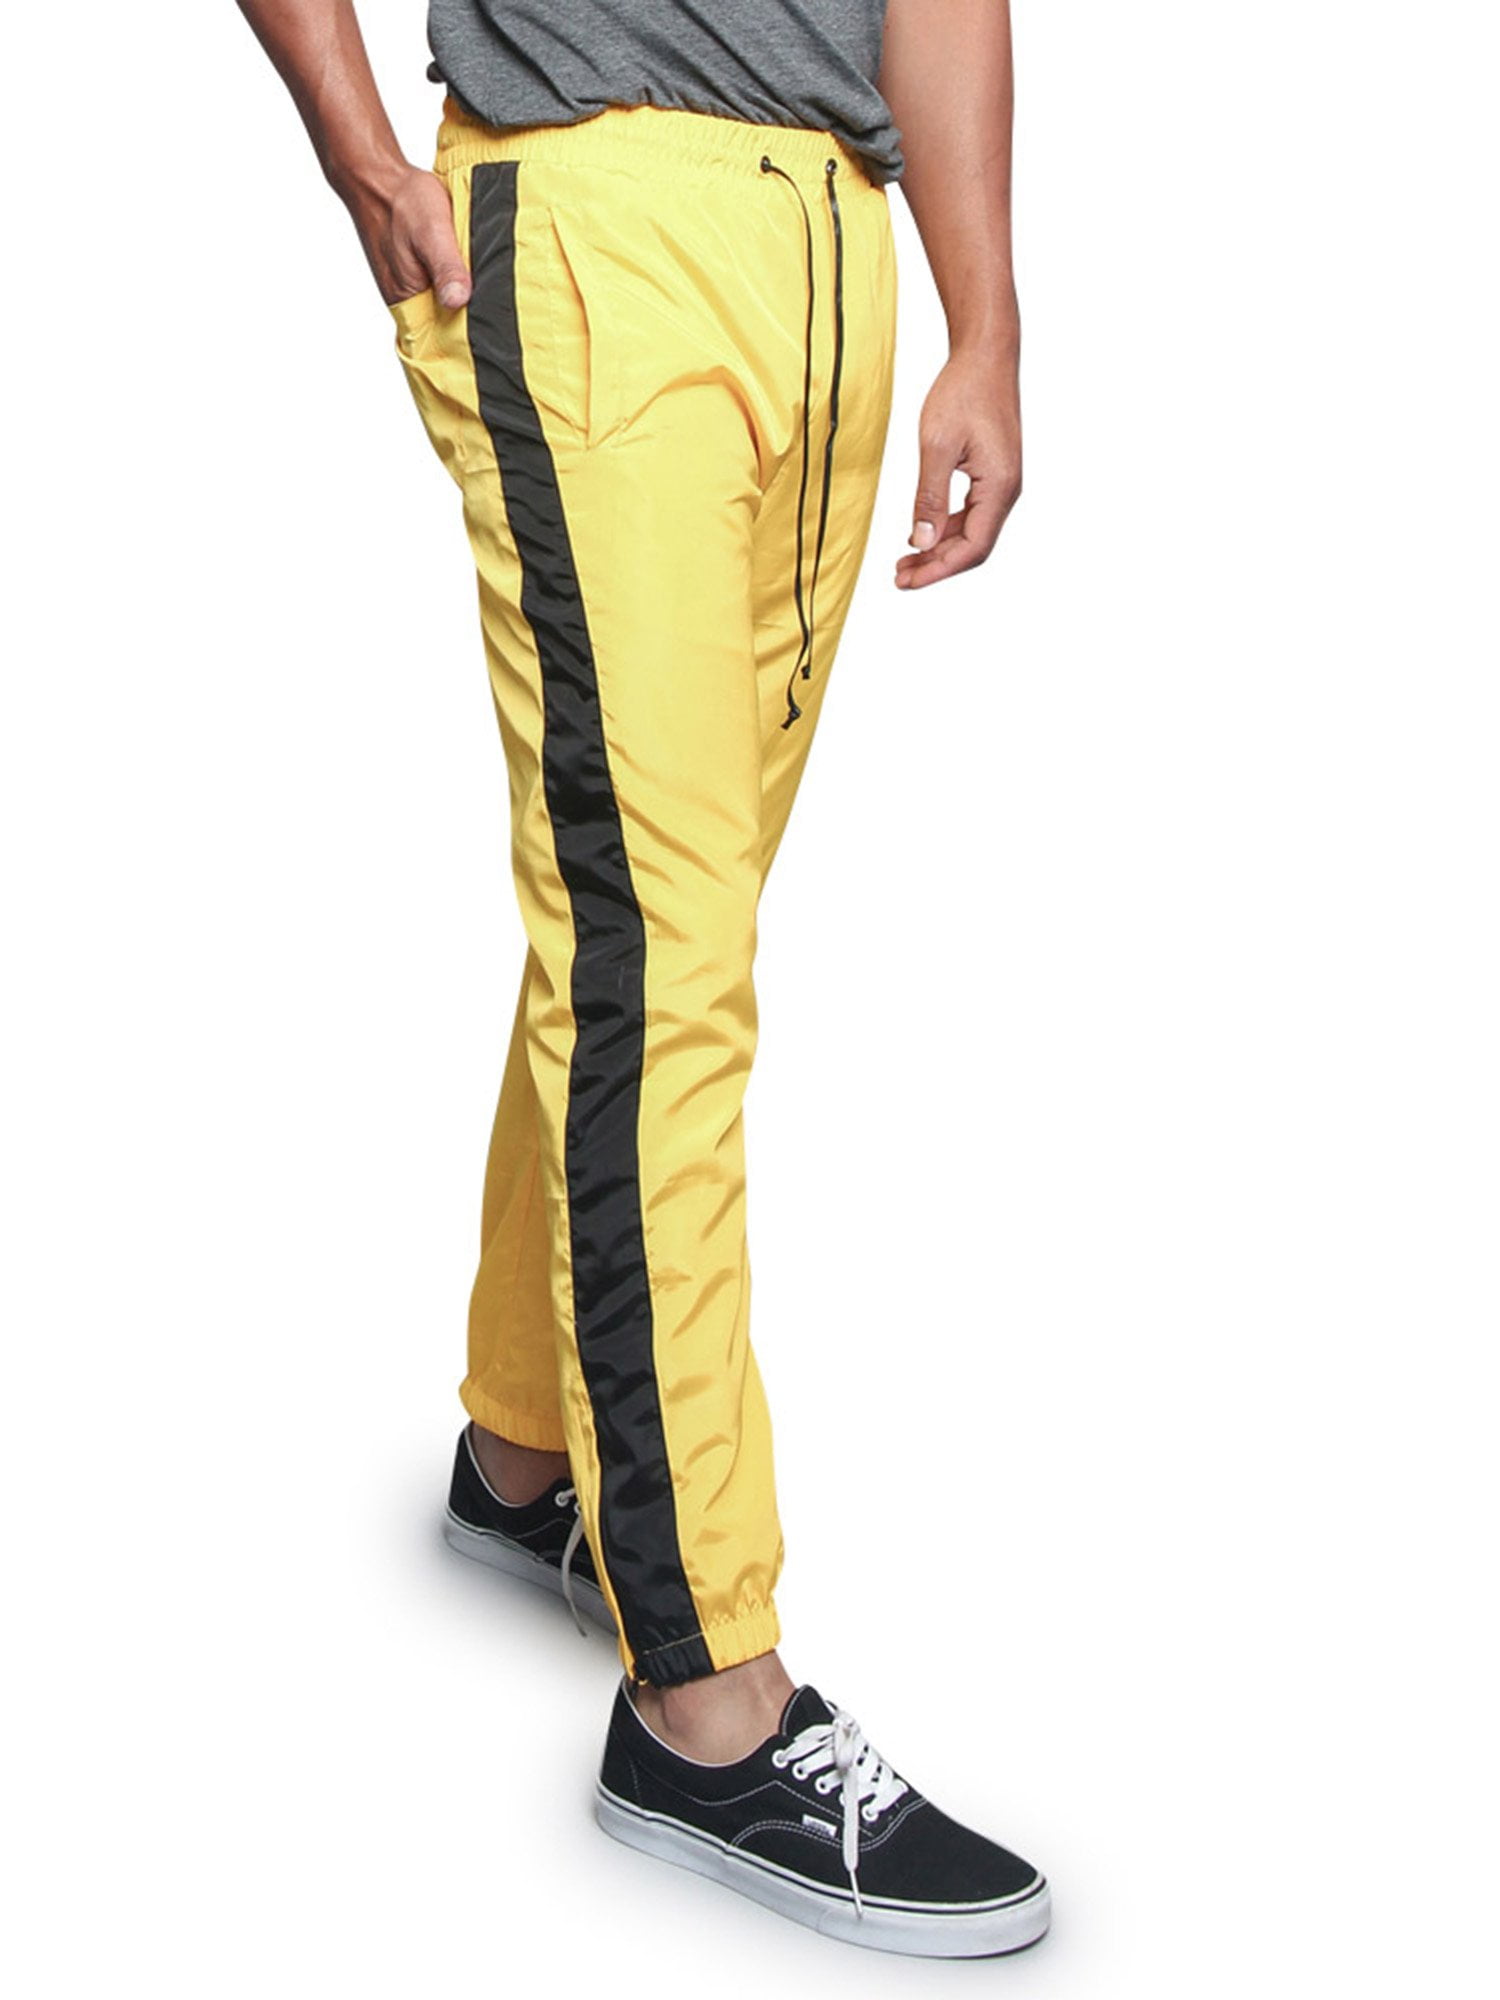 AmericanElm Men's Black Light Weight Stretchy Slim Fit Stylish Printed Track  Pants, Sports Lower for Gym, Cycling, Running and Travel at Rs 499.00, Track  Pant